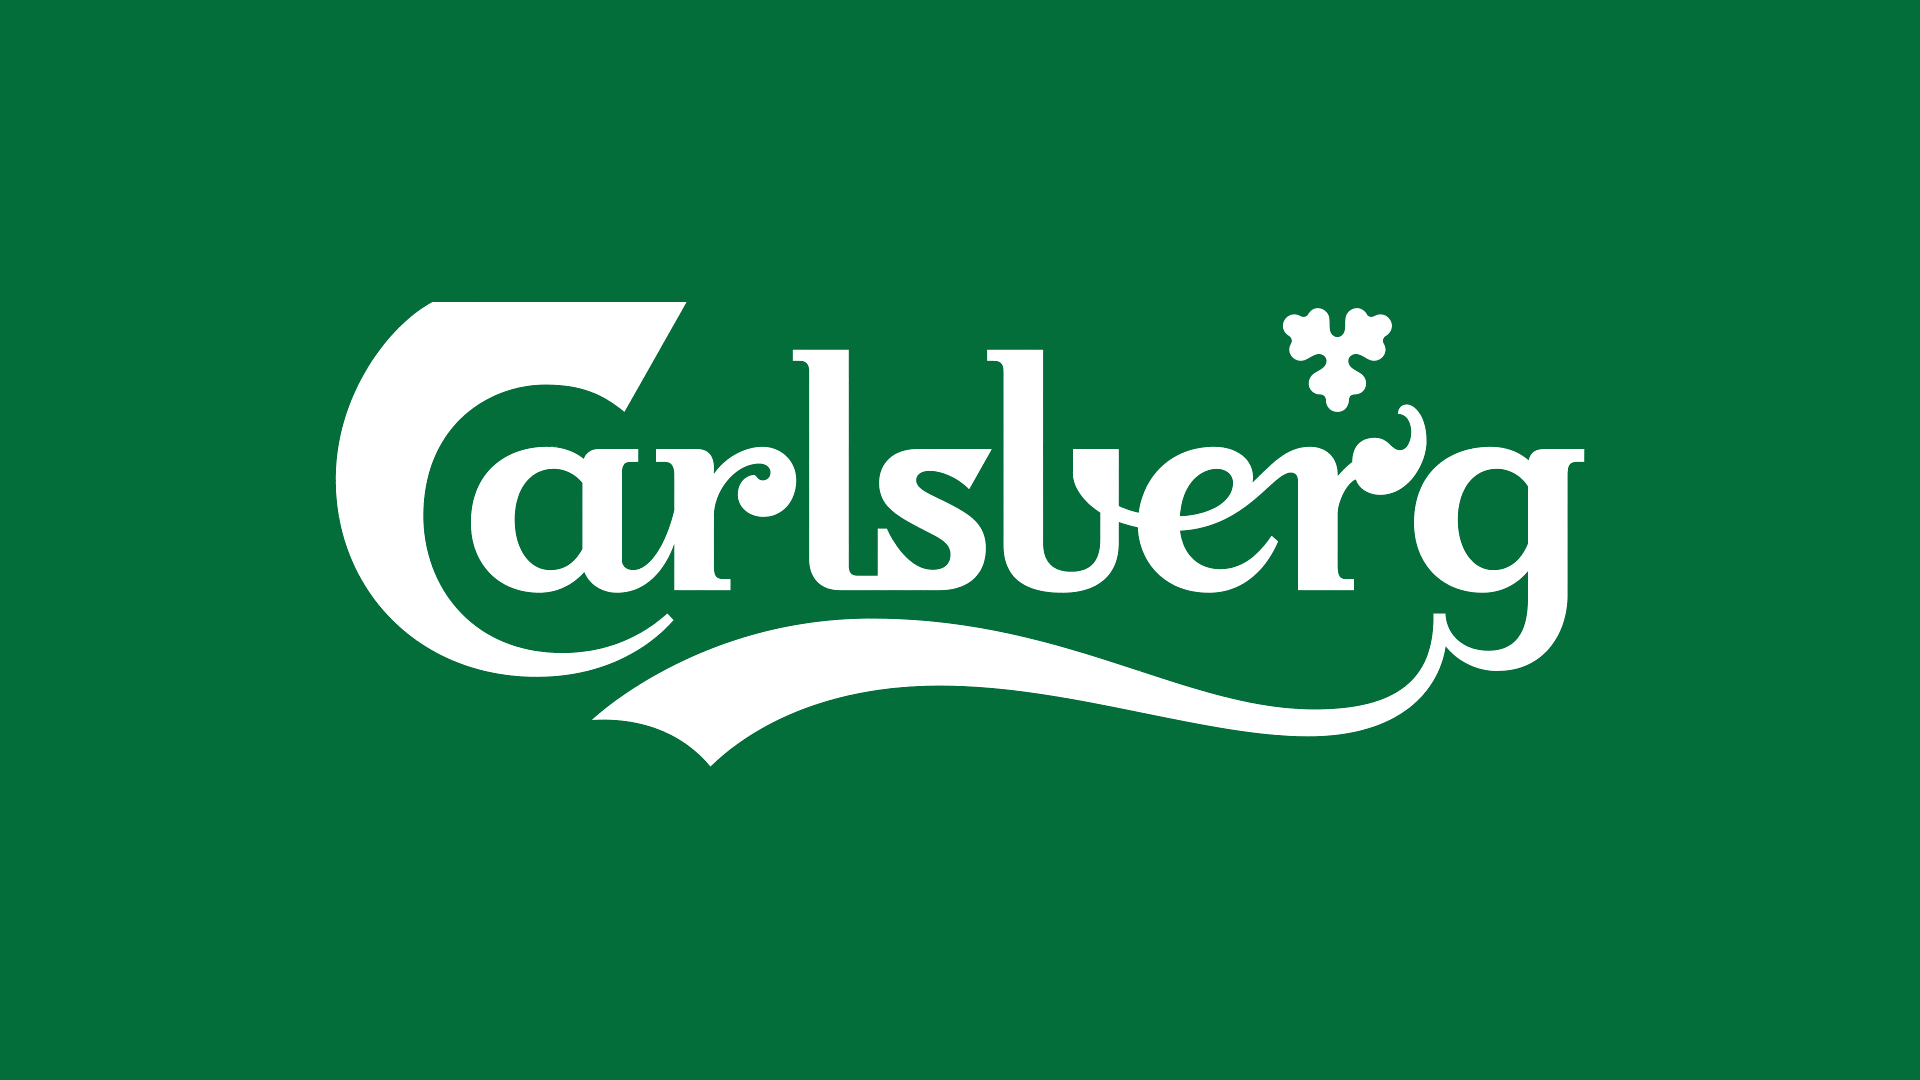 Green Beer Logo - Brand New: New Logo and Packaging for Carlsberg by Taxi Studio